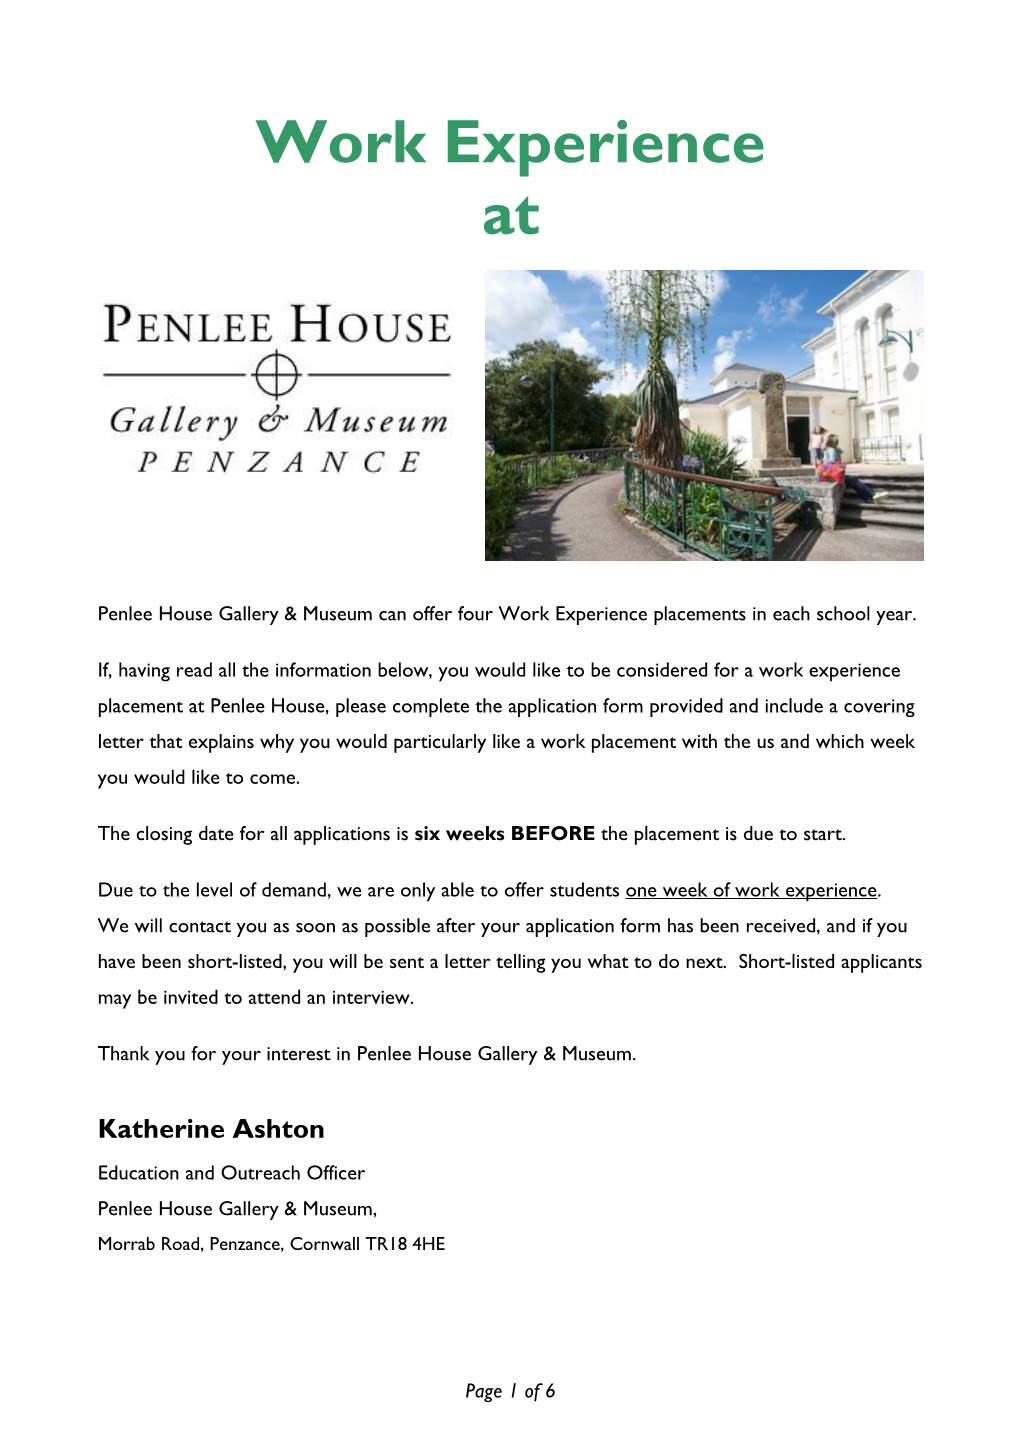 Penlee House Gallery & Museum Can Offer Four Work Experience Placements in Each School Year